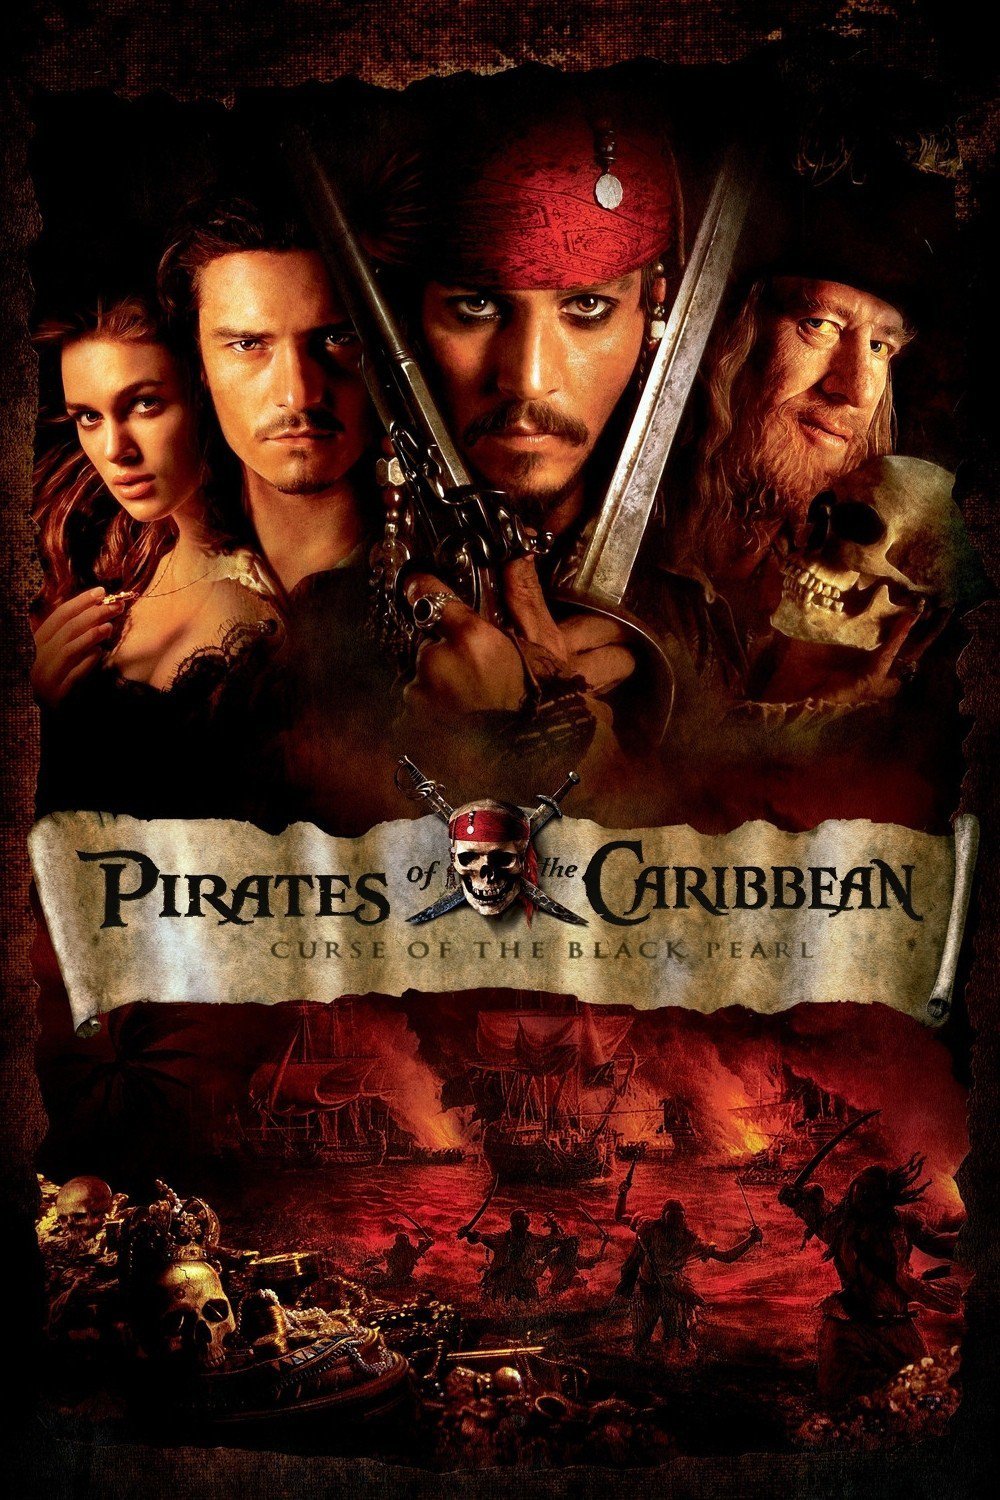 "Pirates of the Caribbean: Curse of the Black Pearl" movie poster